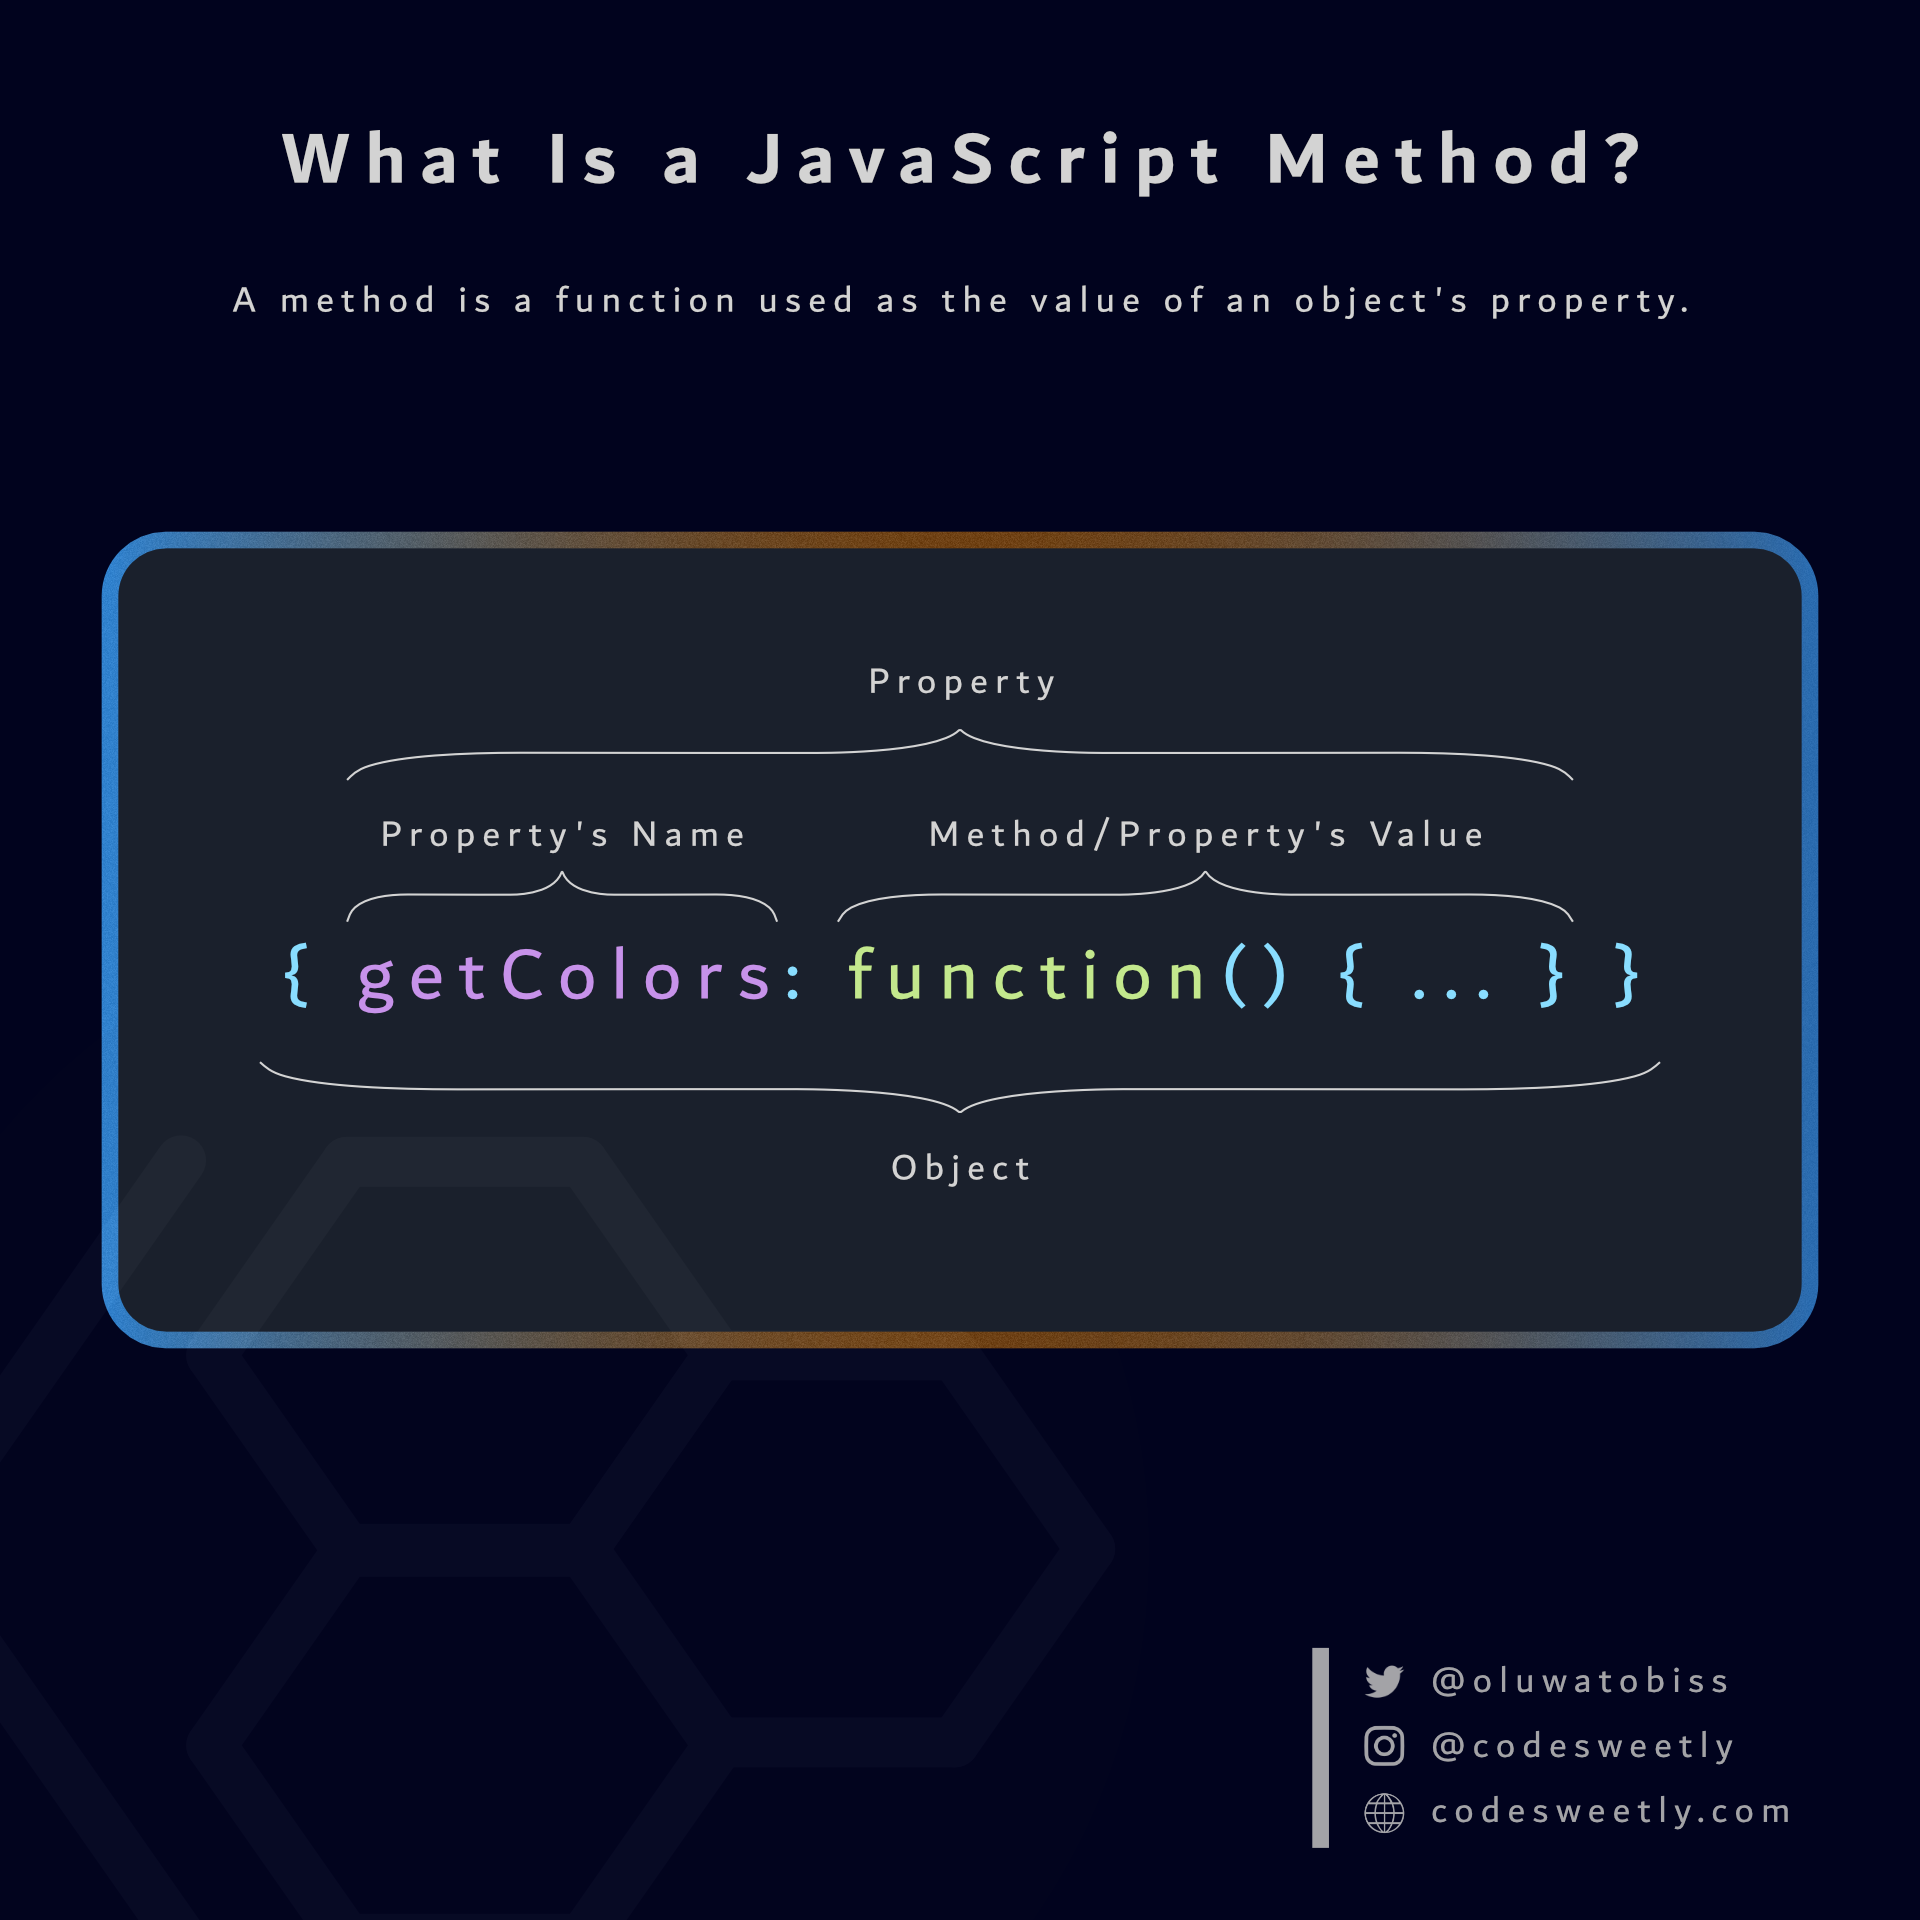 What is a JavaScript method?